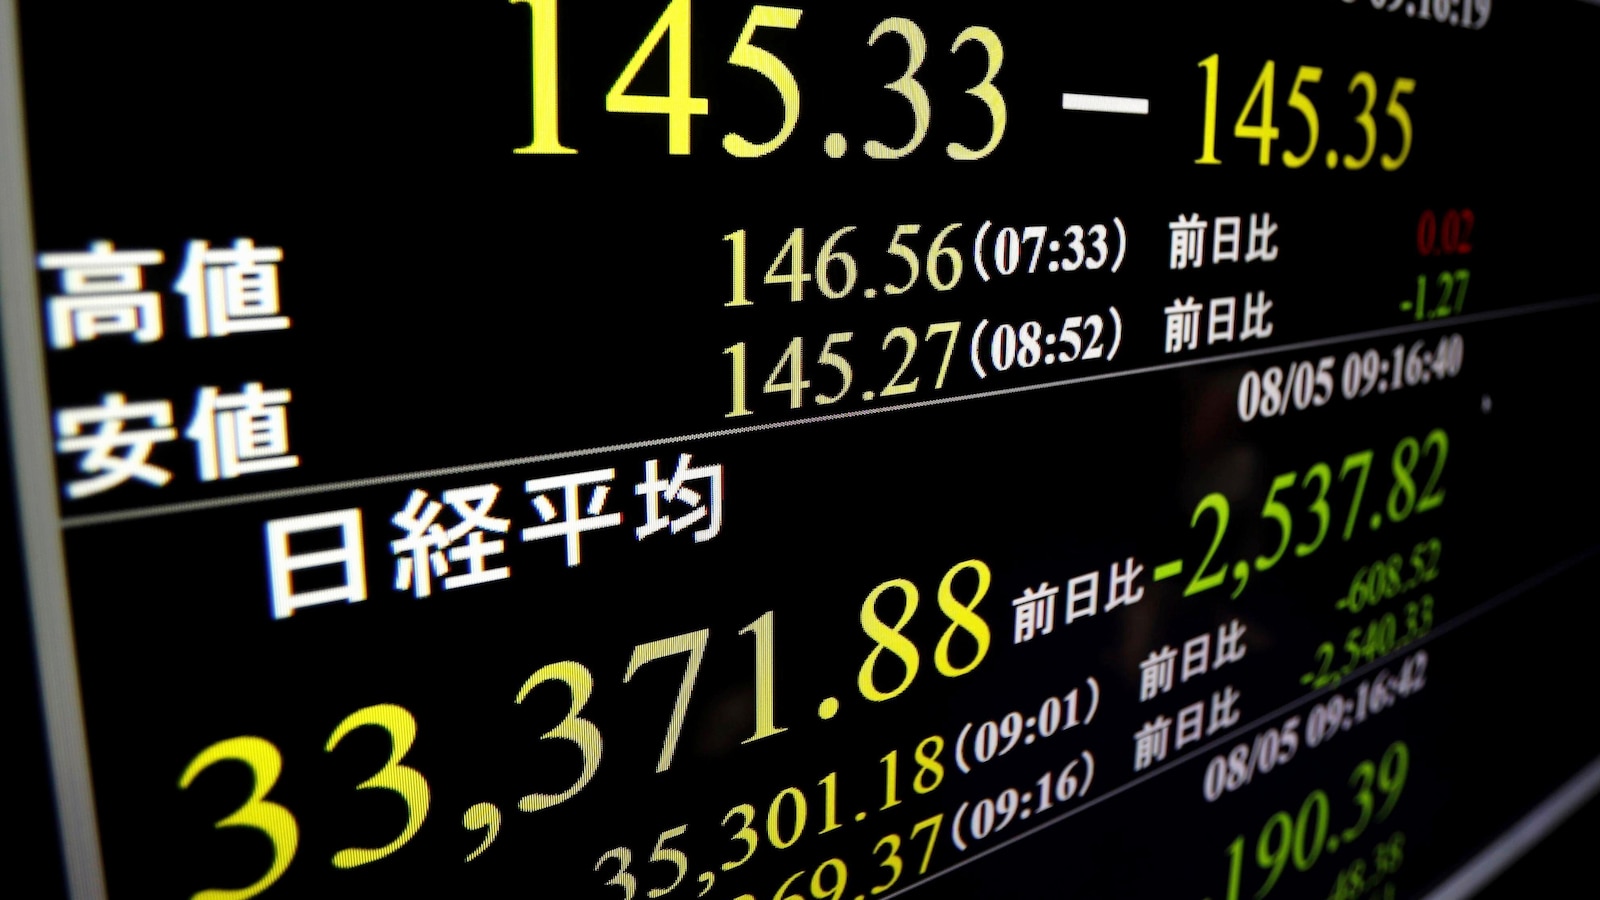 Investors sell off wide range of shares, causing Japan's Nikkei 225 stock index to drop 12.4%